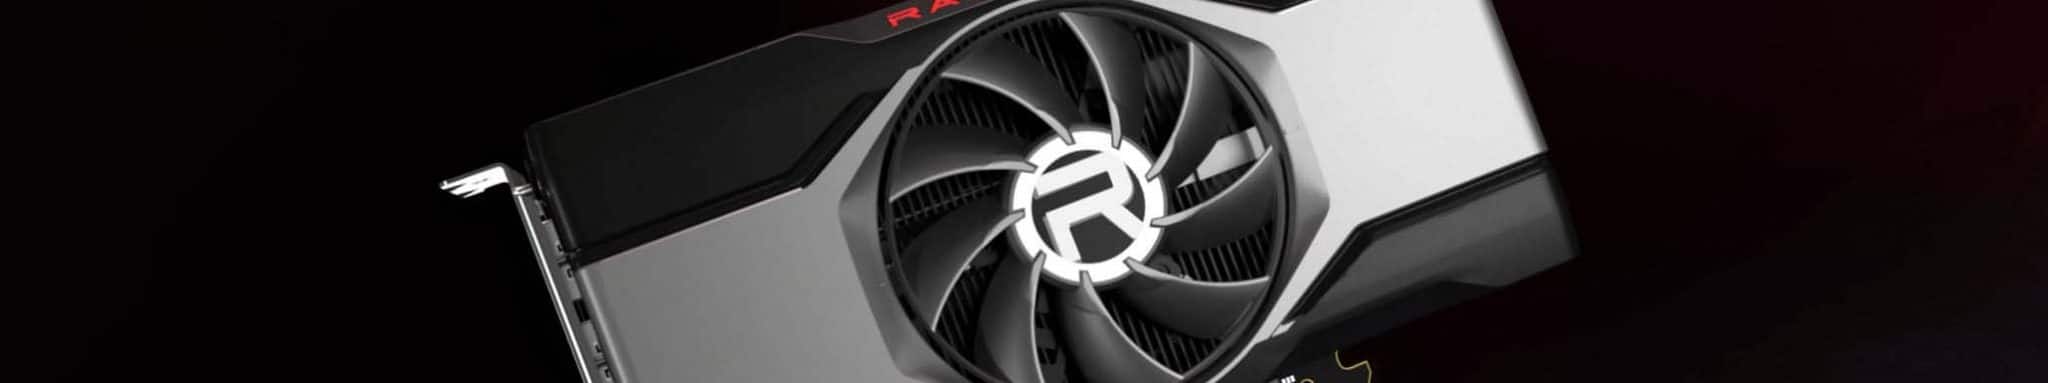 AMD Radeon RX 6600 graphics card coming in October -